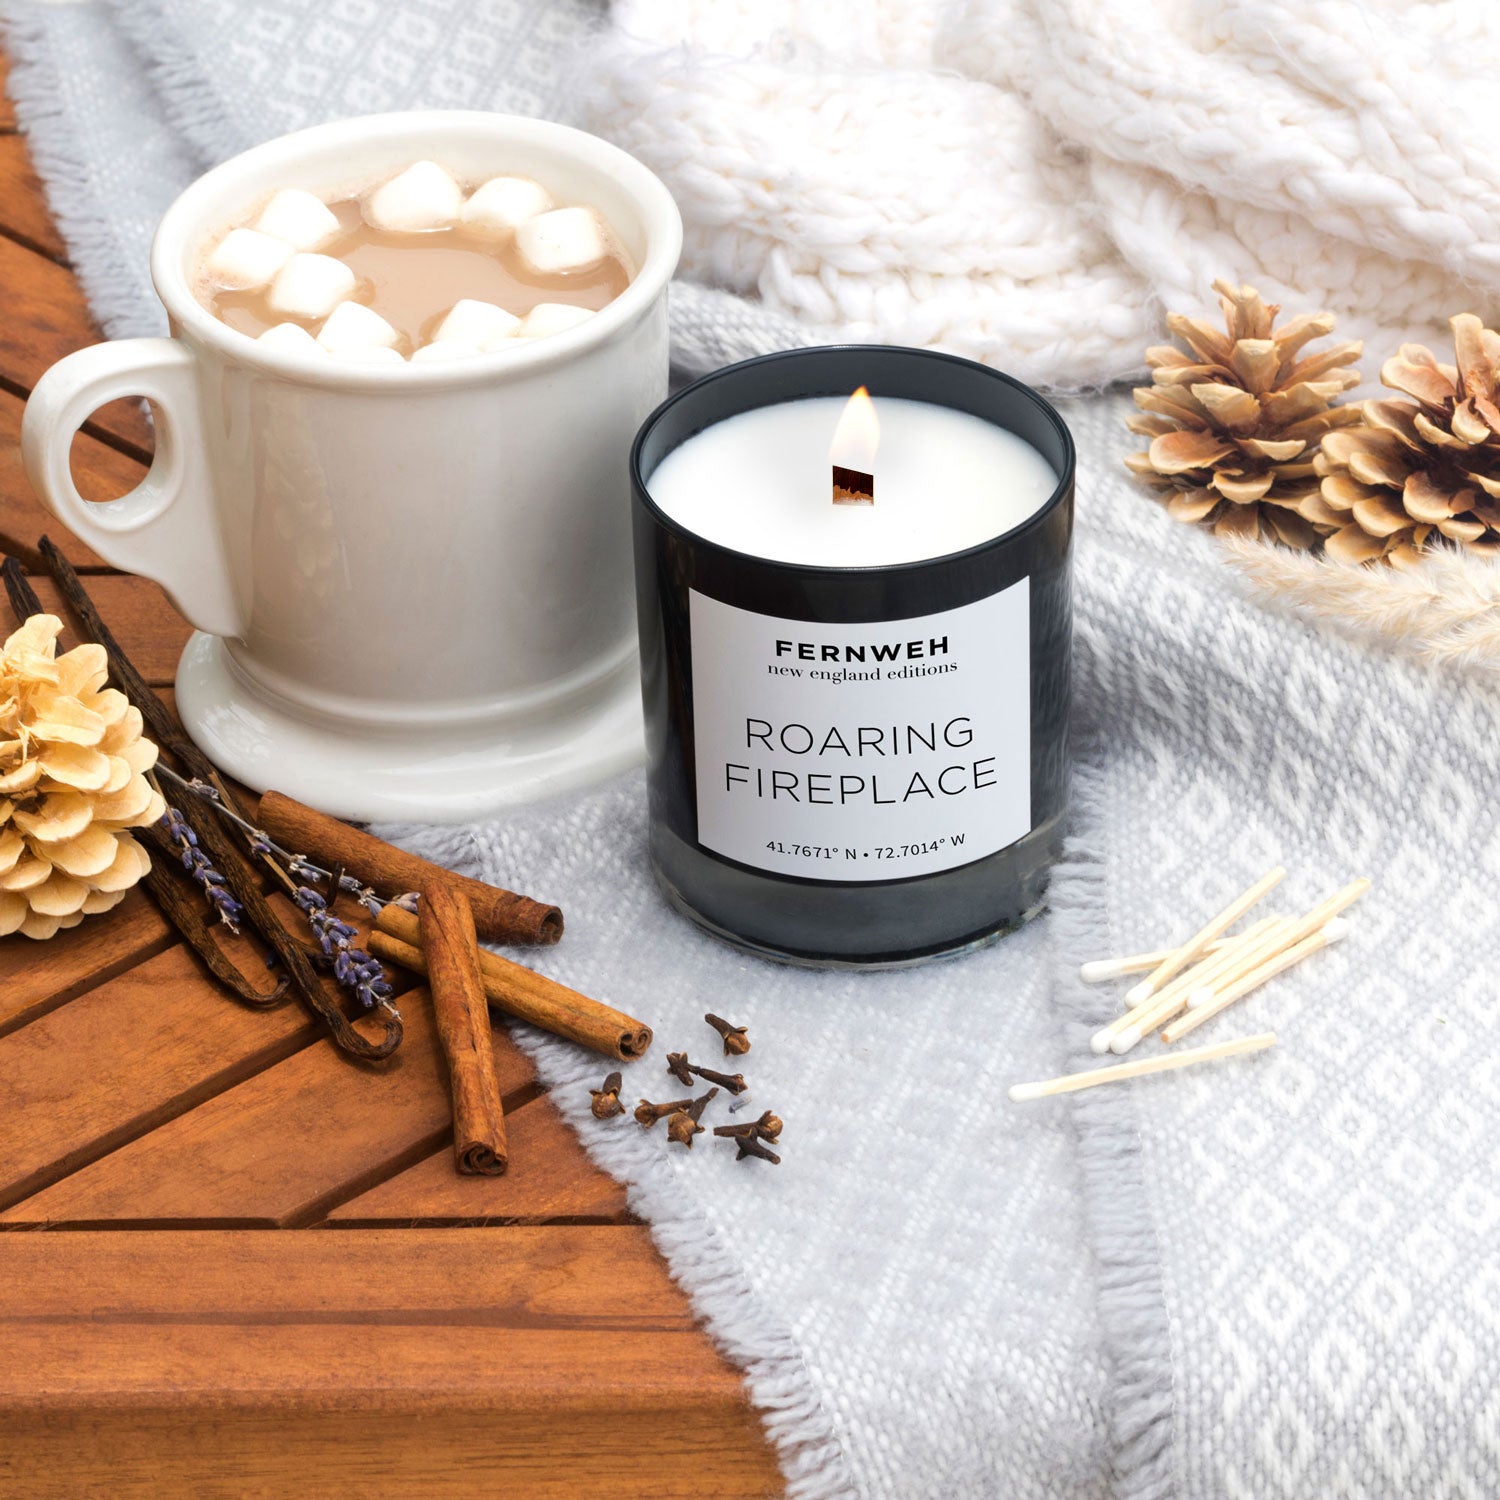 White Sand Beach Candle: Pacific Islands Editions – Fernweh Editions